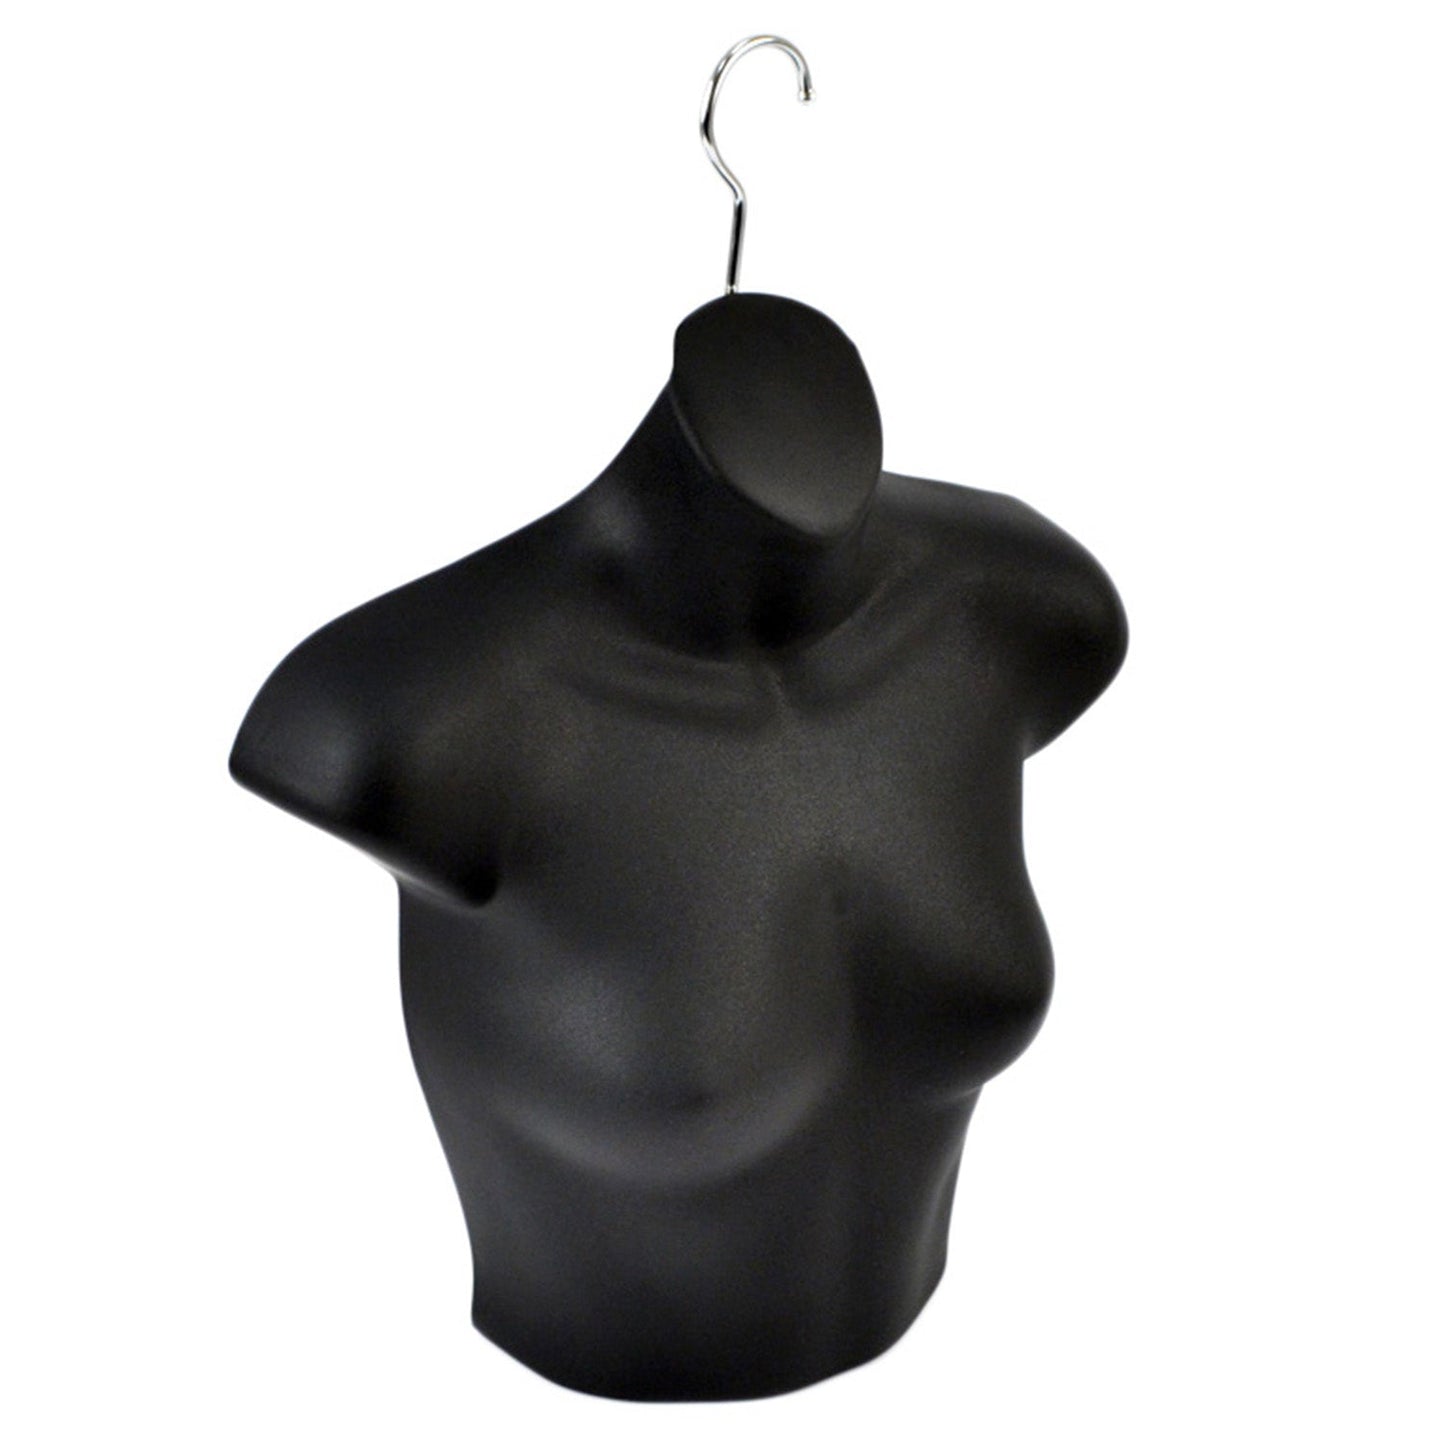 Blk Lg Molded Bust Form W/Hgr